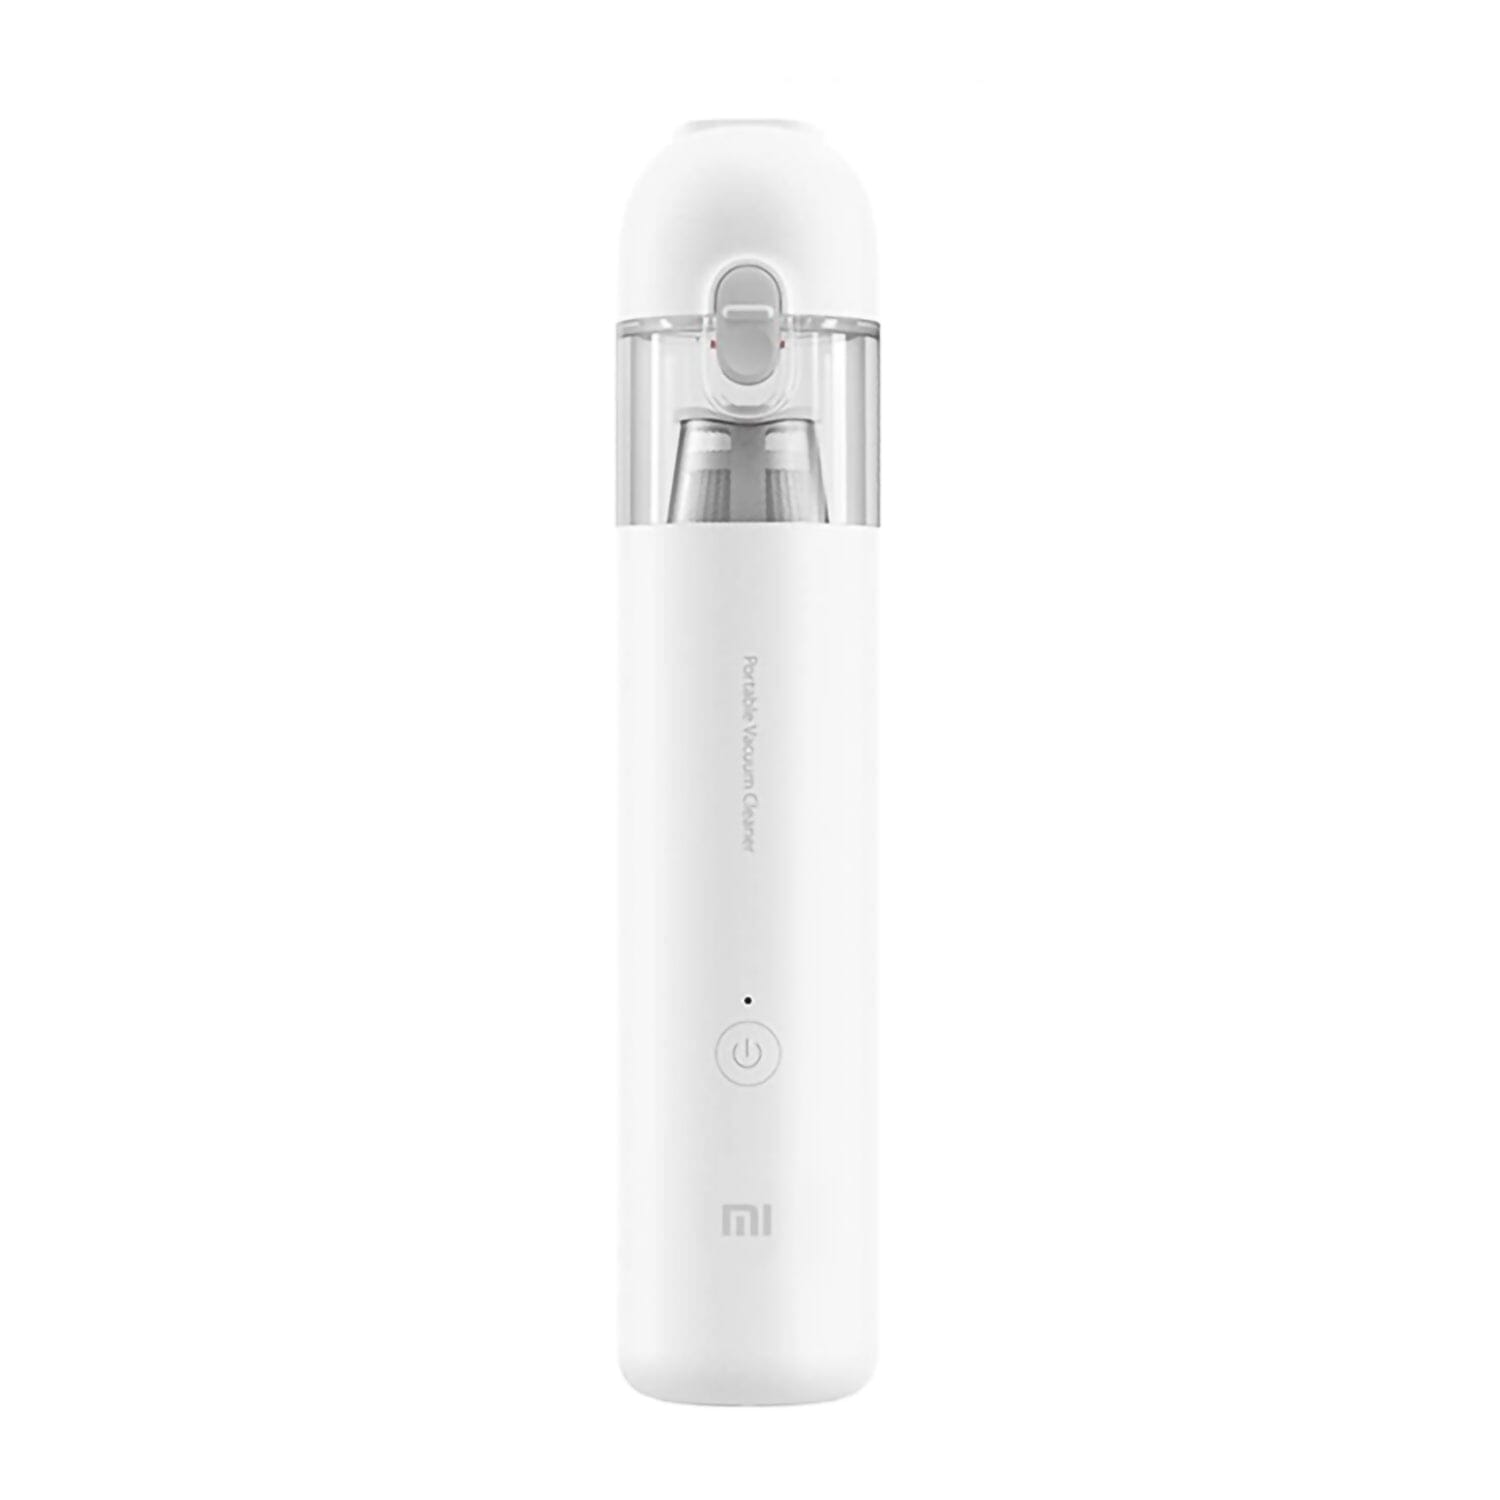 Xiaomi Mi Vacuum Cleaner mini, Handheld Vacuum Cleaner Cordless for Car, Home, Pet and Other Crevices [Local Official Warranty] Xiaomi 